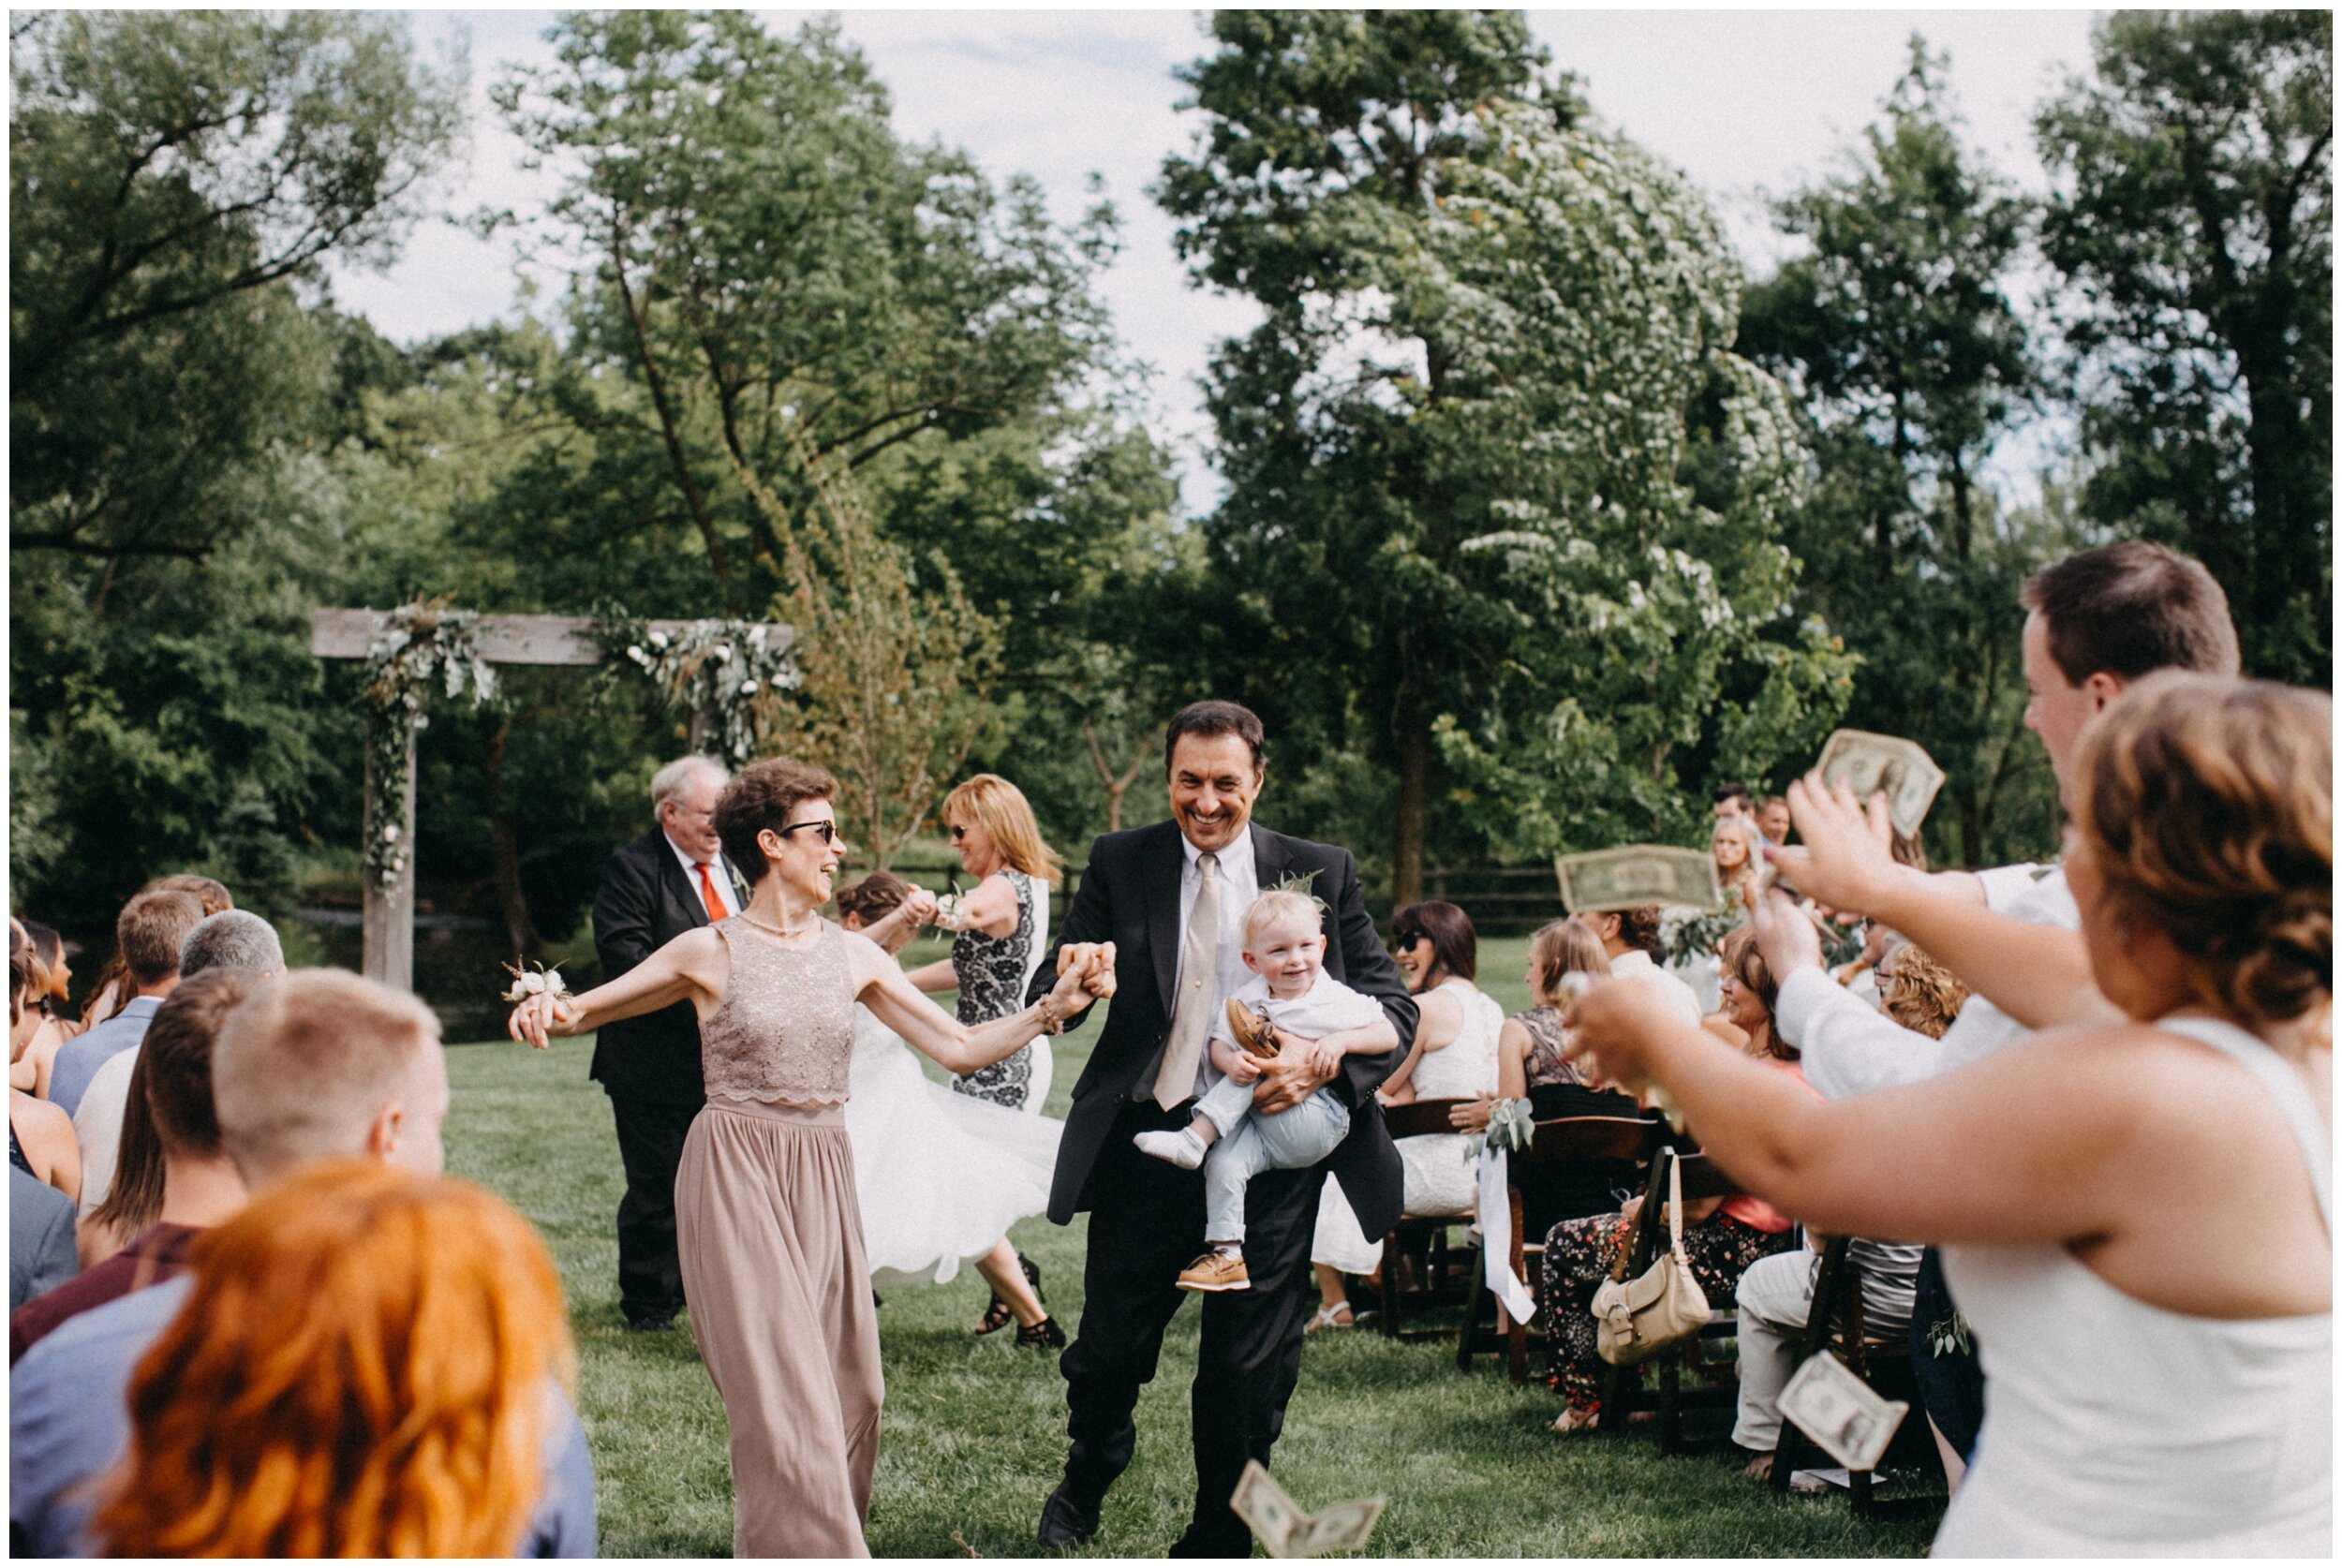 Groom's parents dancing down aisle and bridesmaid throwing money at them 